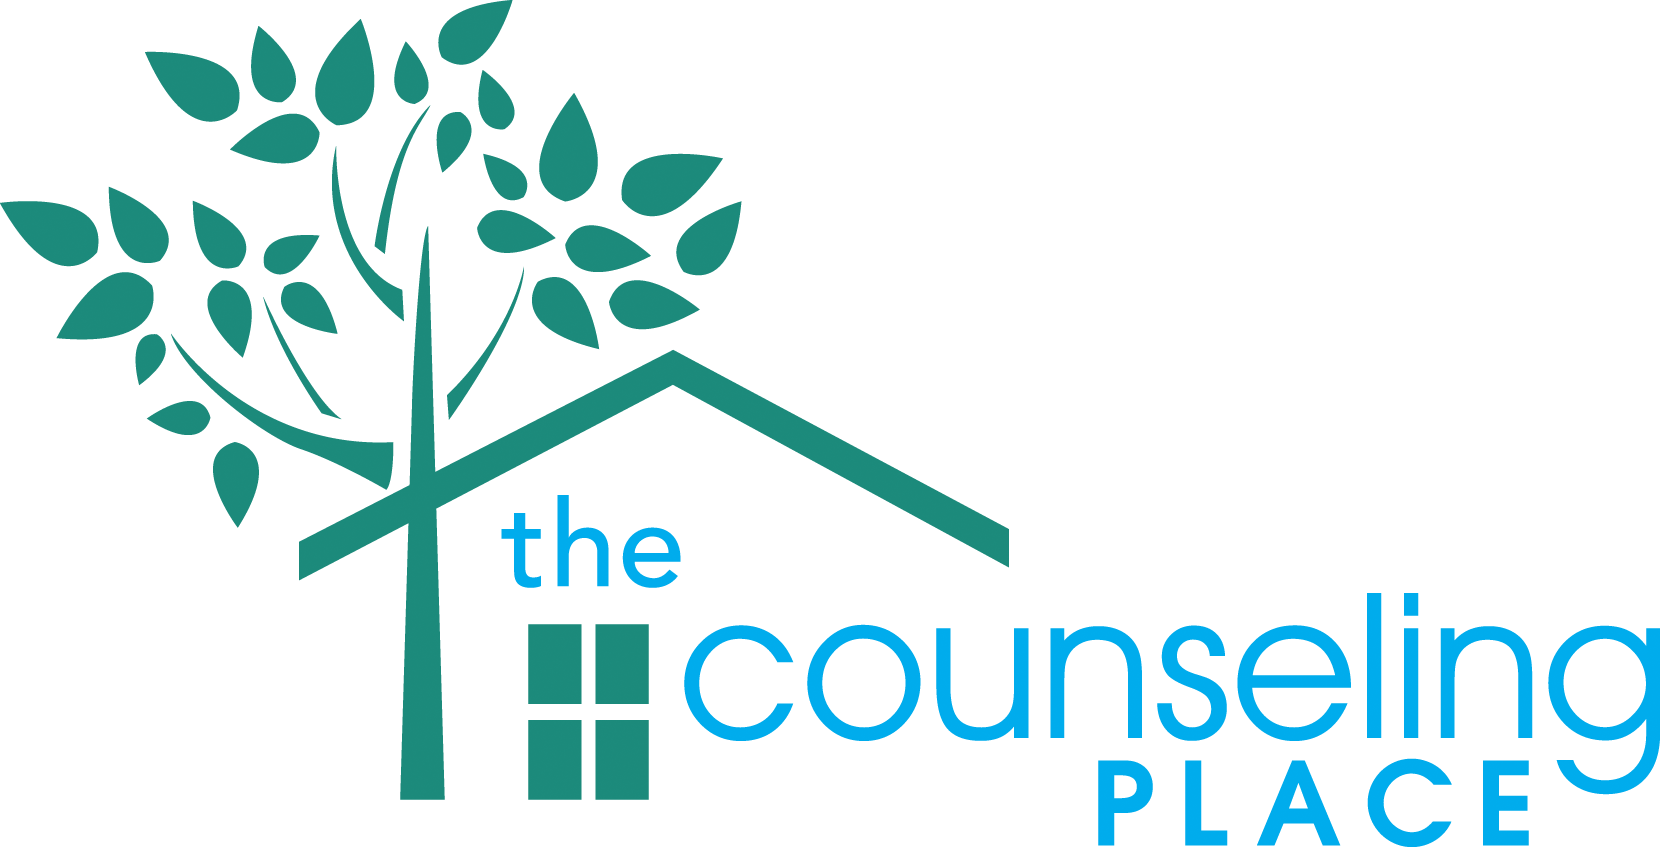 The Counseling Place